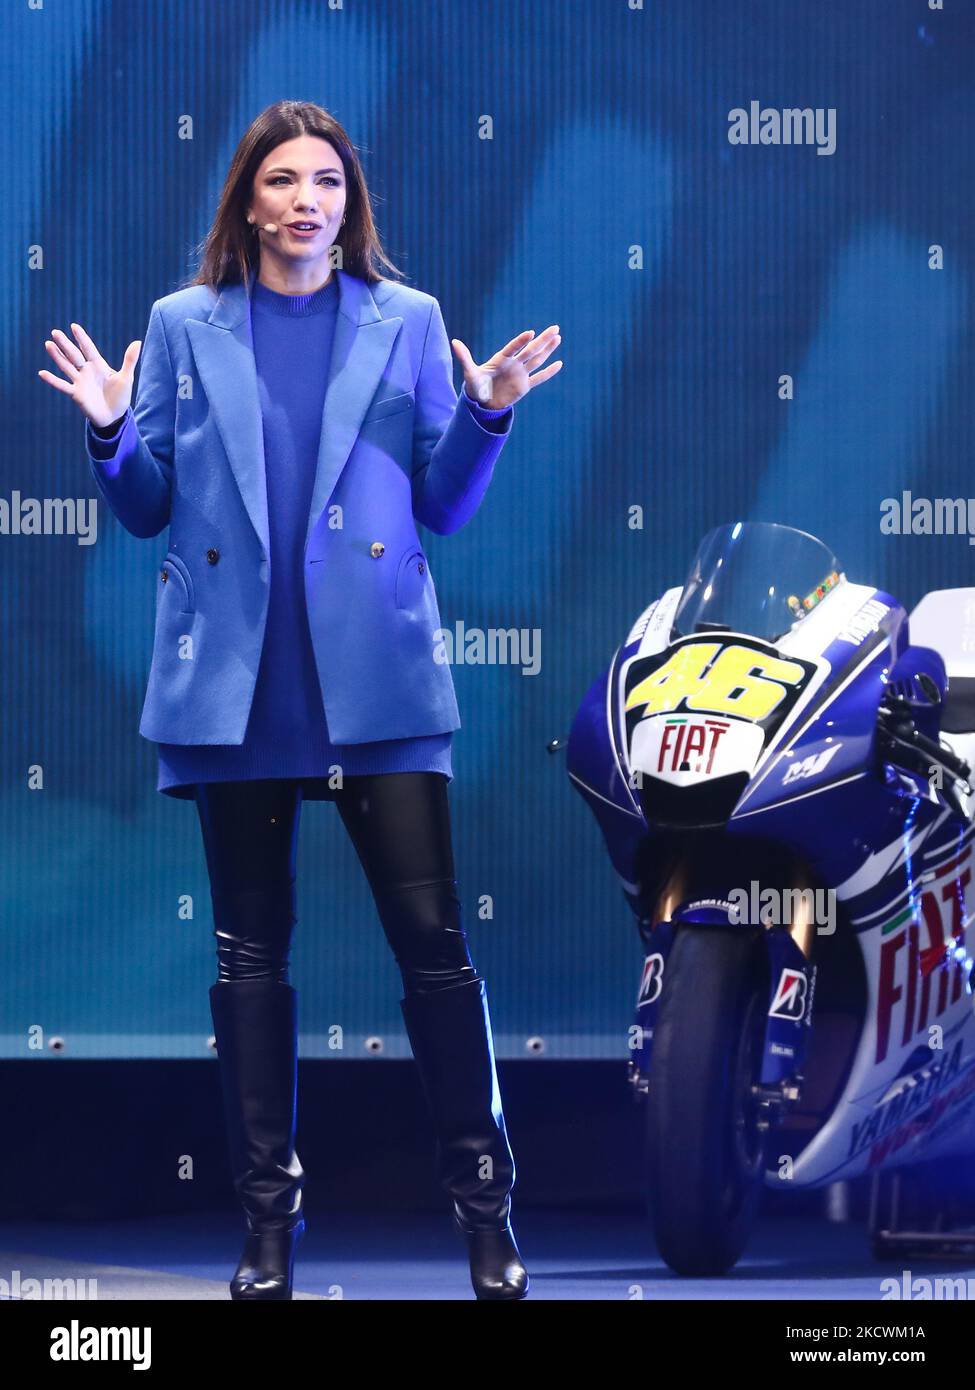 Federica Masolin during the 'One More Lap' event, organized to mark the end of Valentino Rossi's MotoGP career, as a part of the EICMA motorcycle show in Milan, Italy on November 25, 2021. (Photo by Jakub Porzycki/NurPhoto) Stock Photo